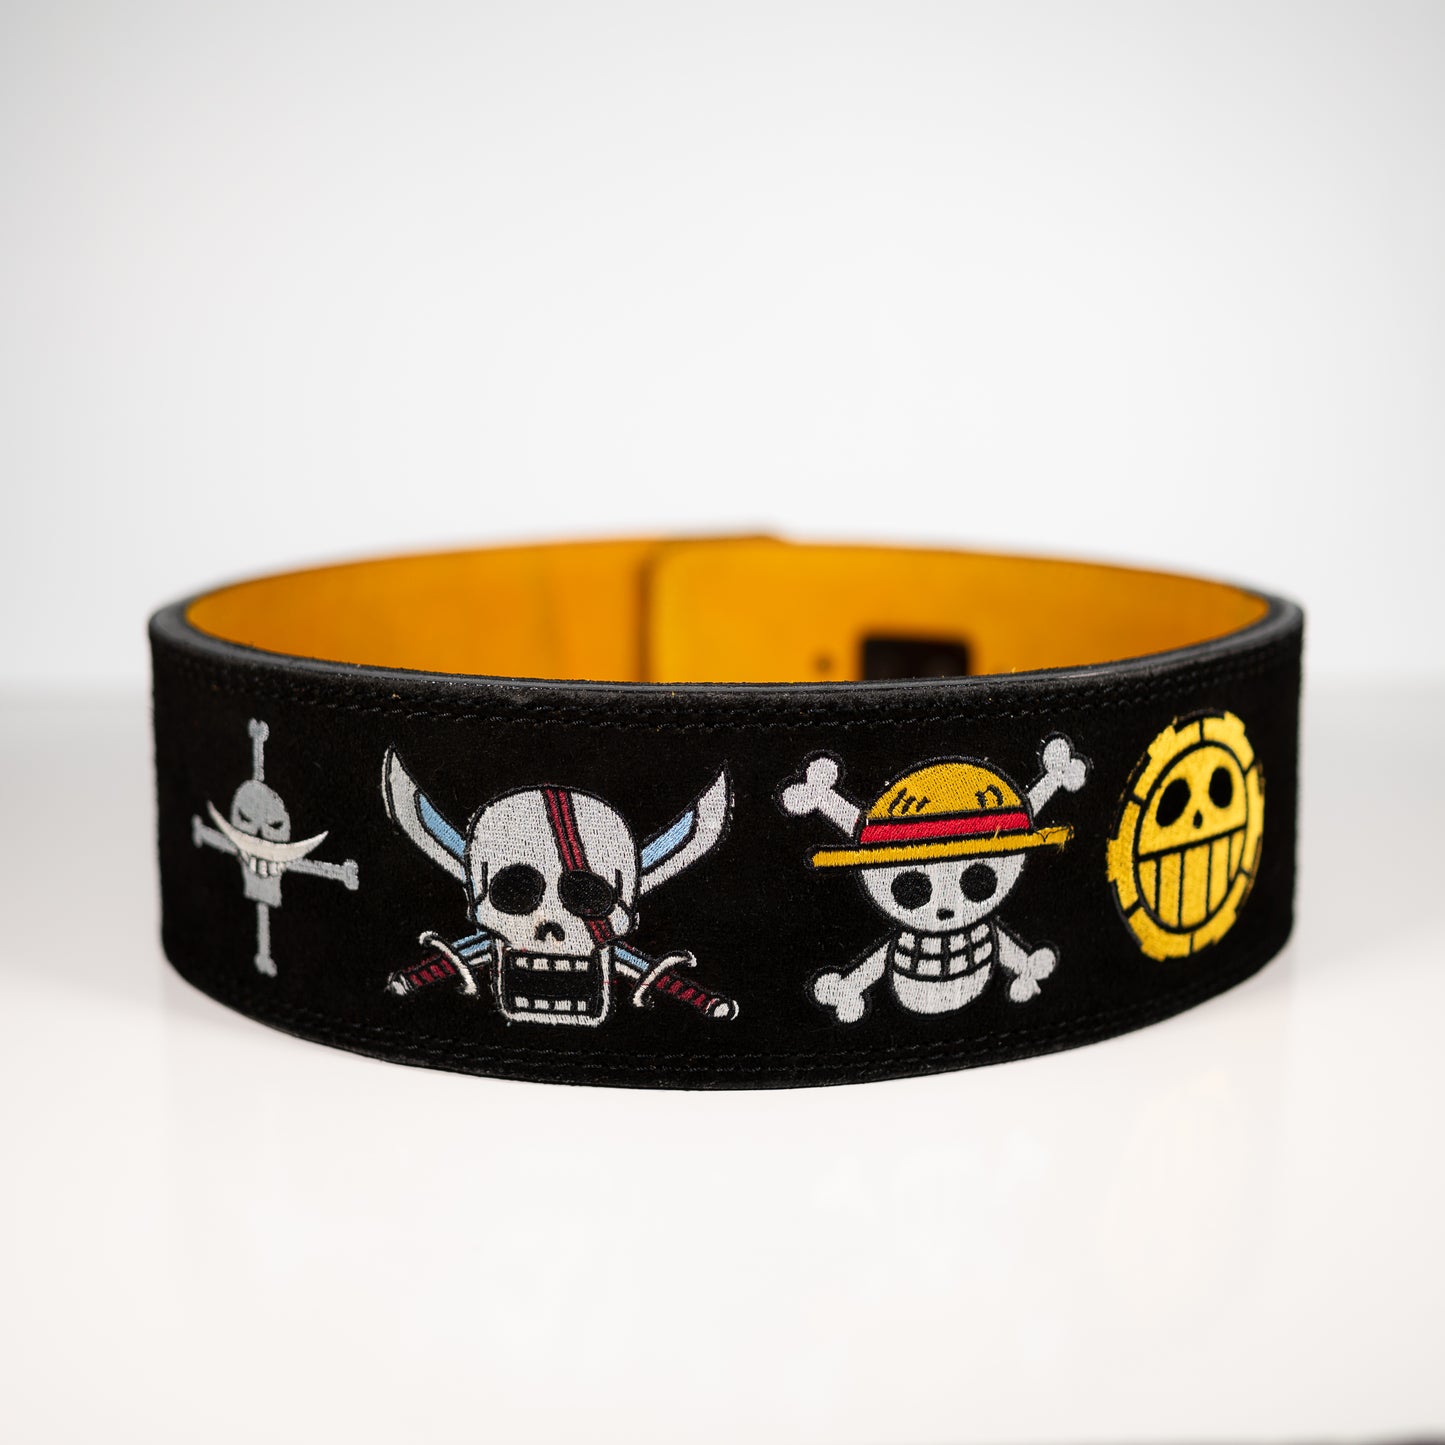 The Pirate Kings Lever Belt